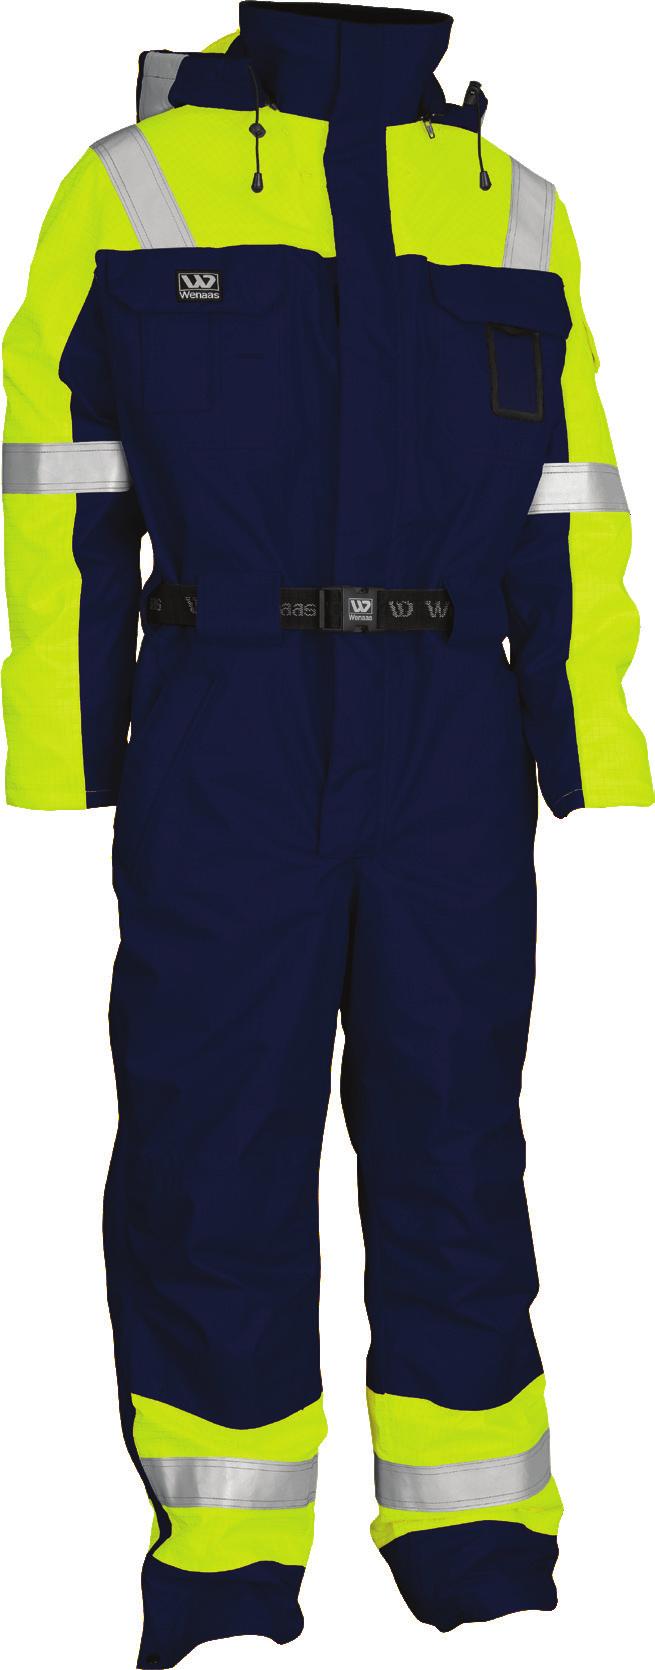 THERMAL + FR WENAAS OFFSHORE WINTER FR COVERALL Model No.